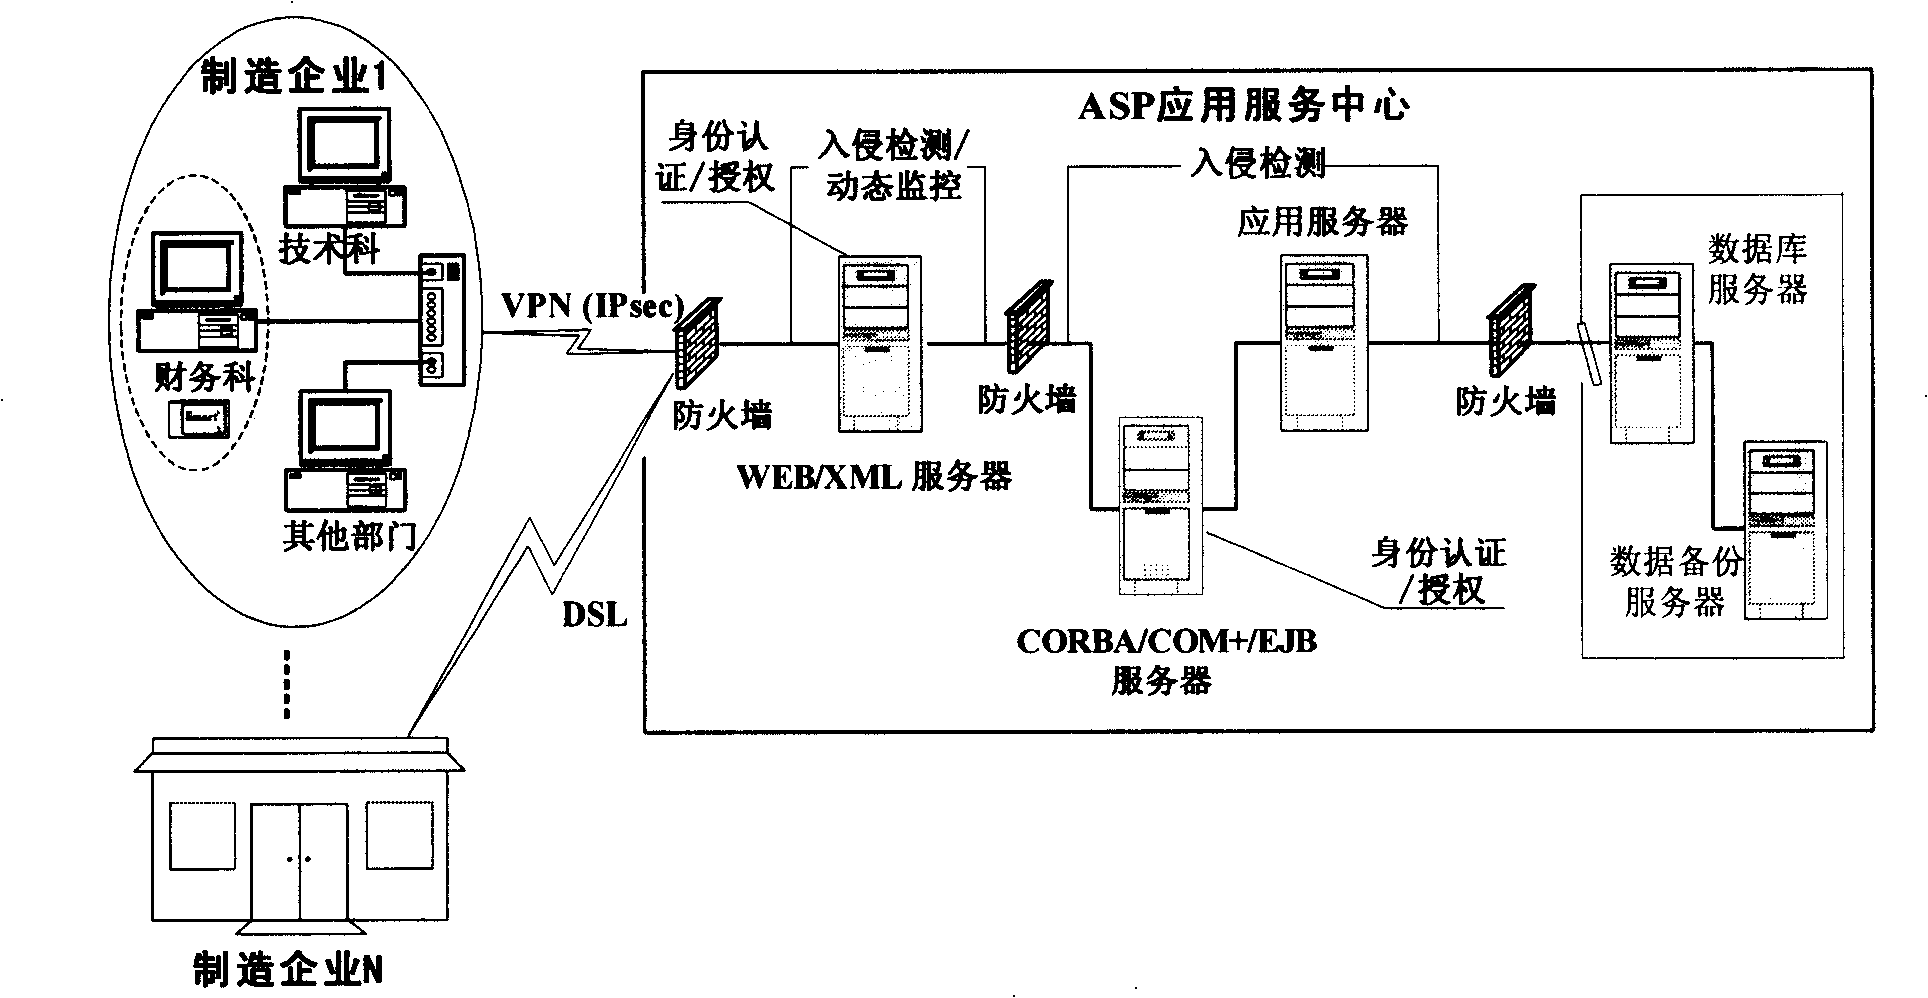 Networking fabrication safety integrating system based on ASP mode